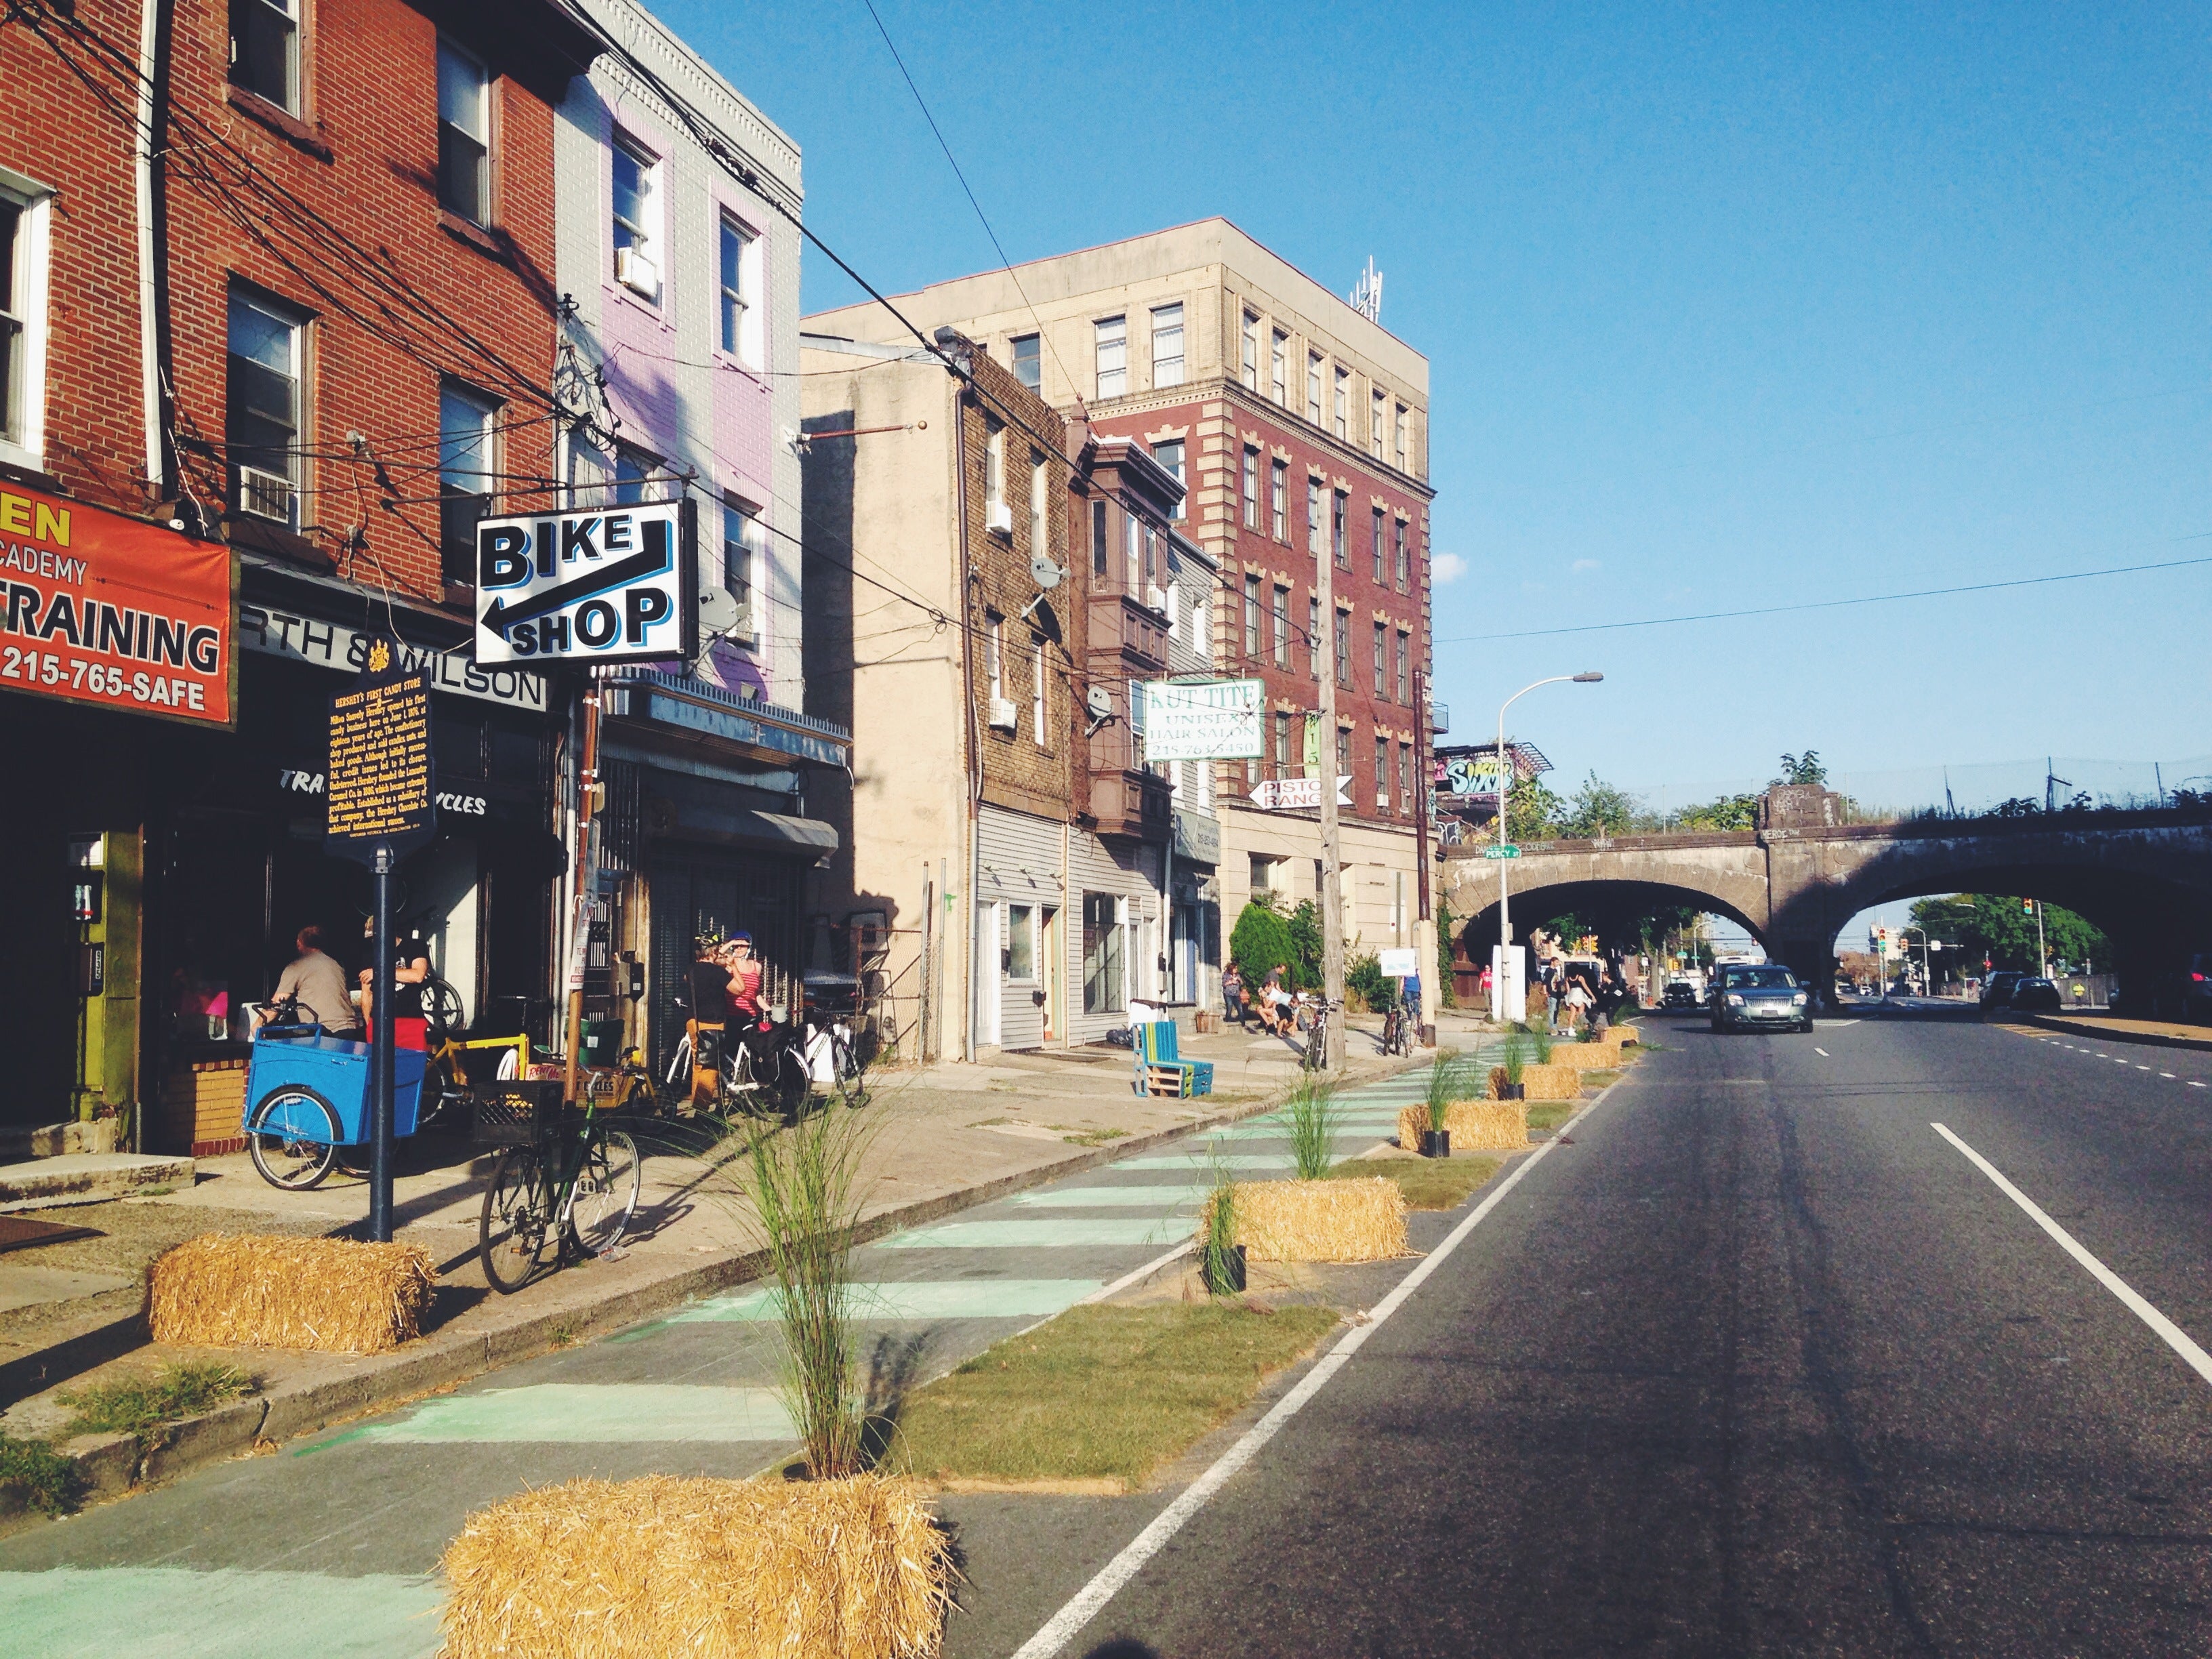 A 2014 pop-up greenway on the westbound lane on the 900 block of Spring Garden Street, one block from the accident on 10th and Spring Garden Streets. Credit: Jon Geeting/PlanPhilly